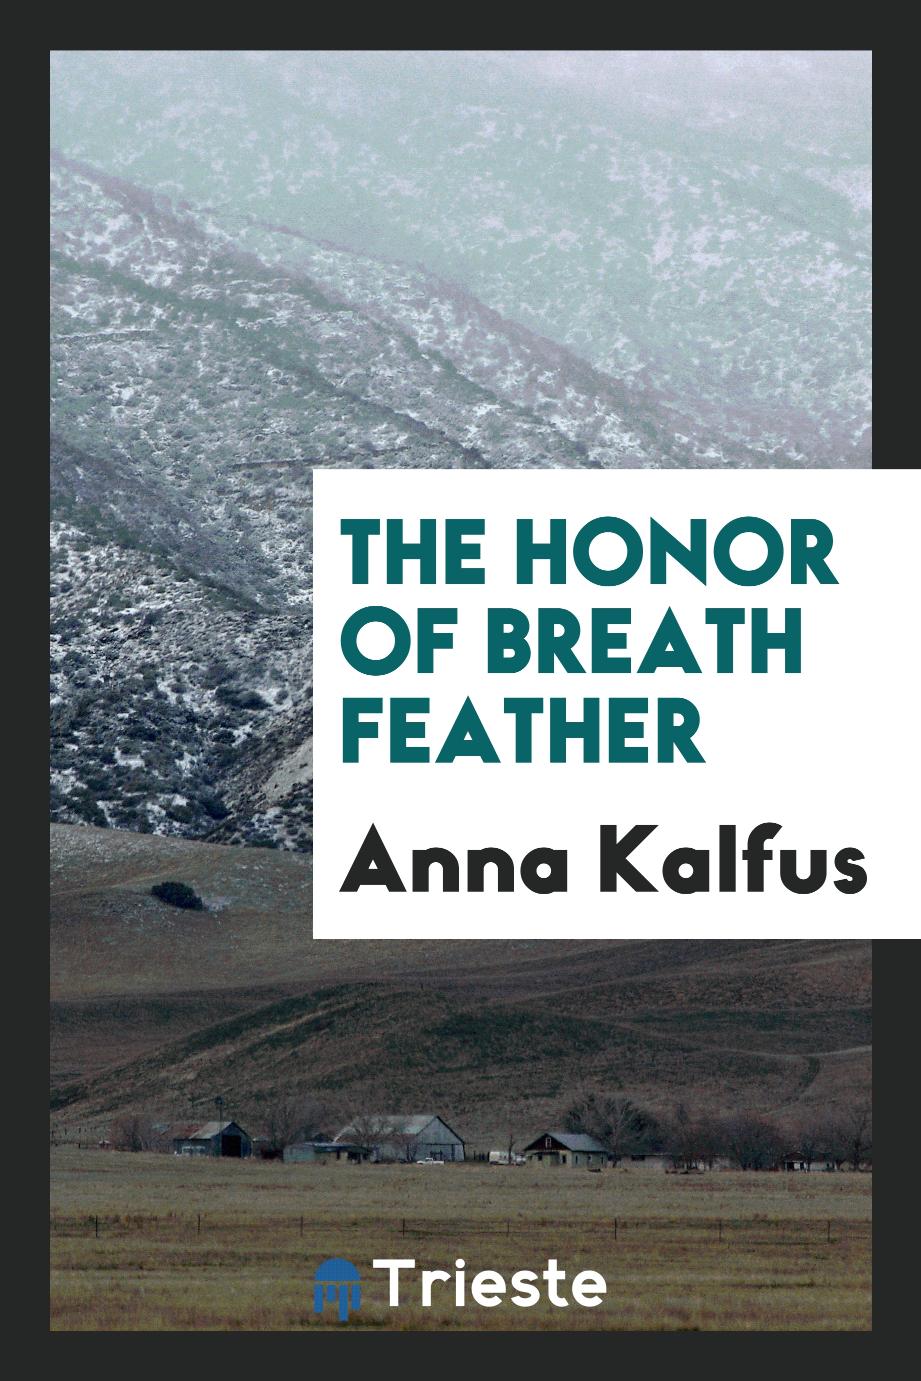 The Honor of Breath Feather